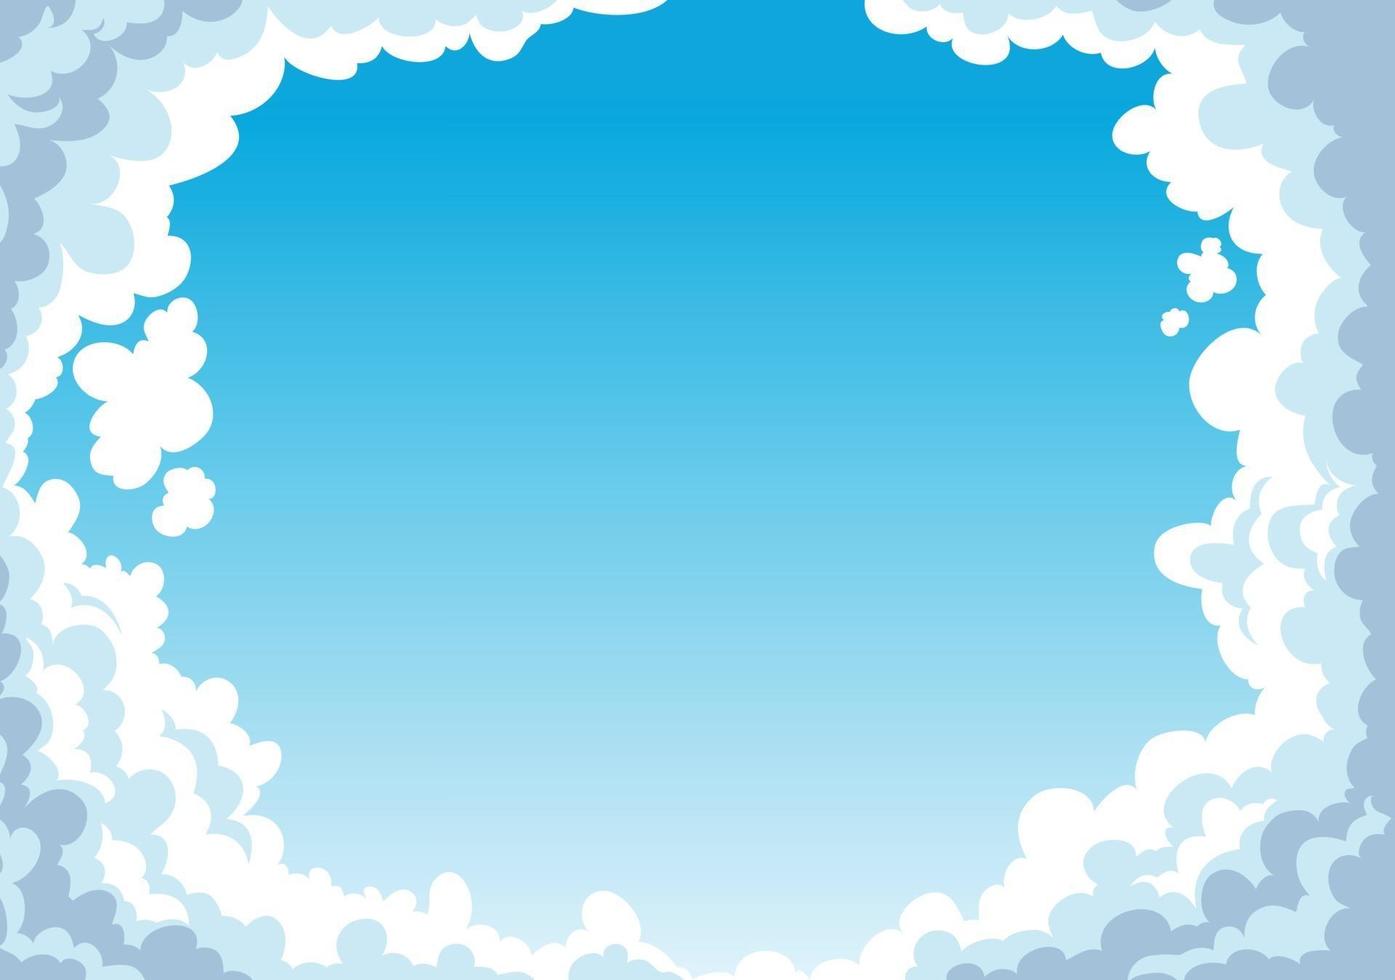 Blue sky with clouds background vector